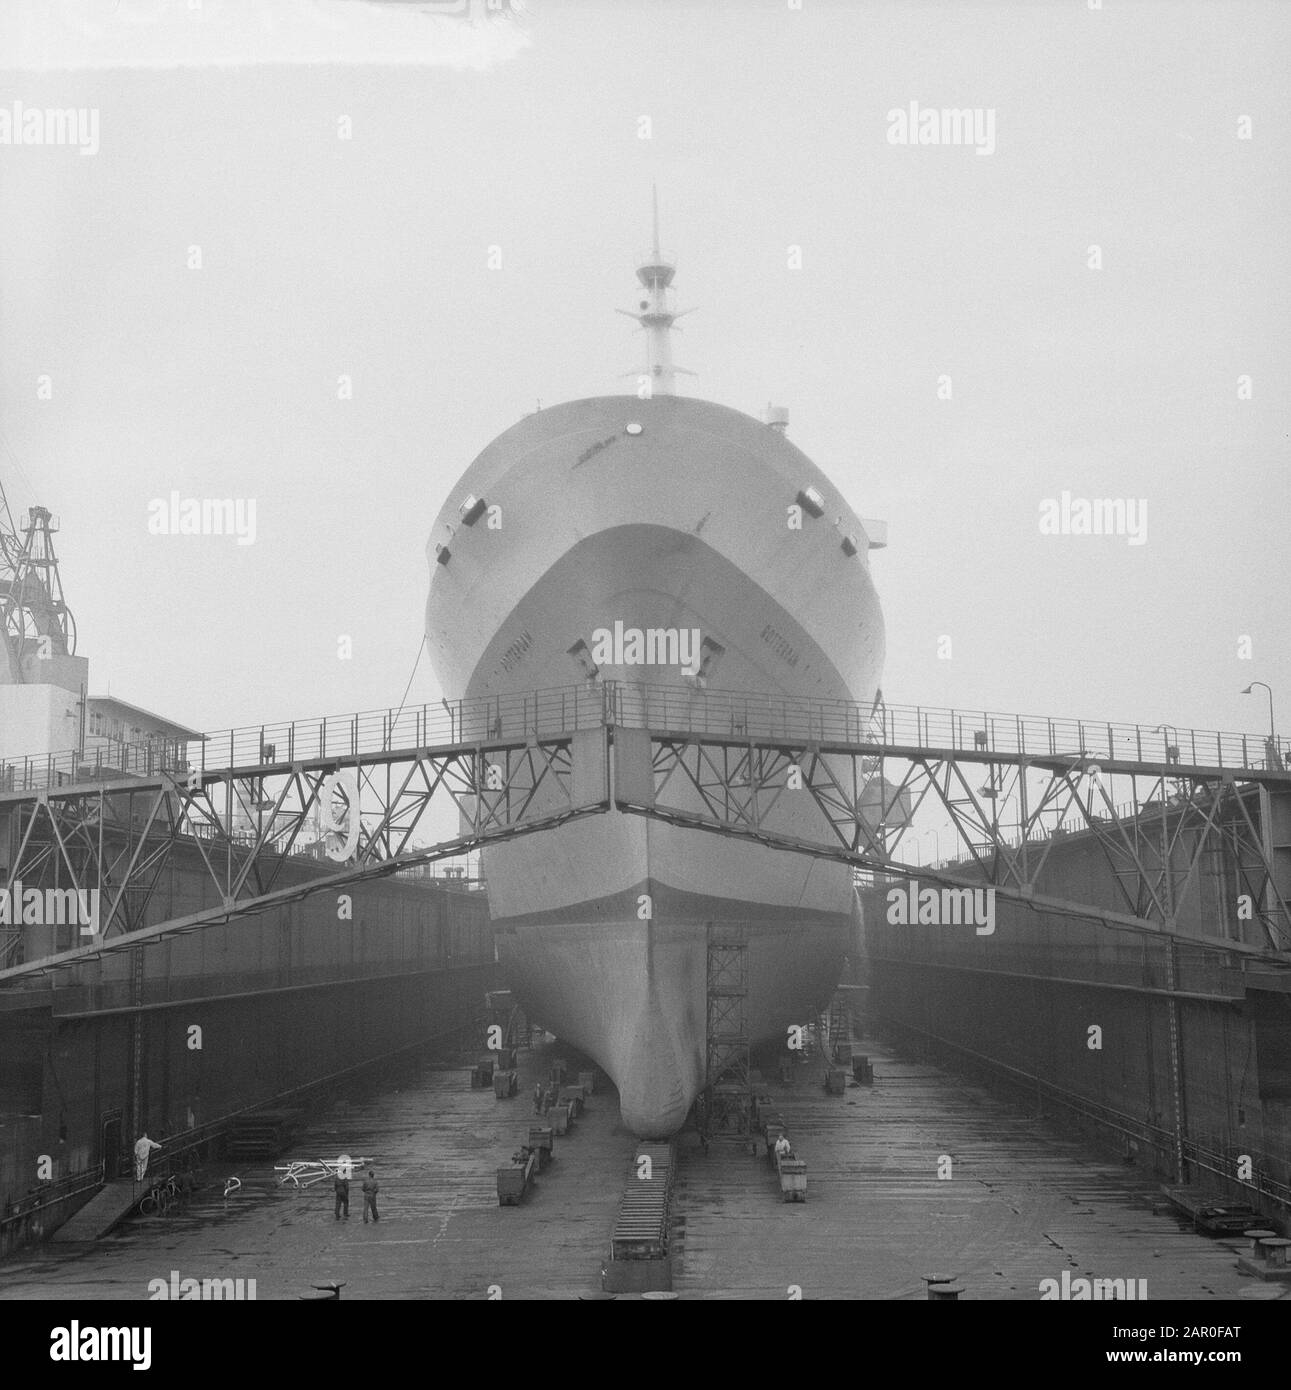 Cursus meer atleet Flagship HAL de s/s Rotterdam for the first time in the dock Date: November  5, 1963 Location: Rotterdam, Zuid-Holland Stock Photo - Alamy